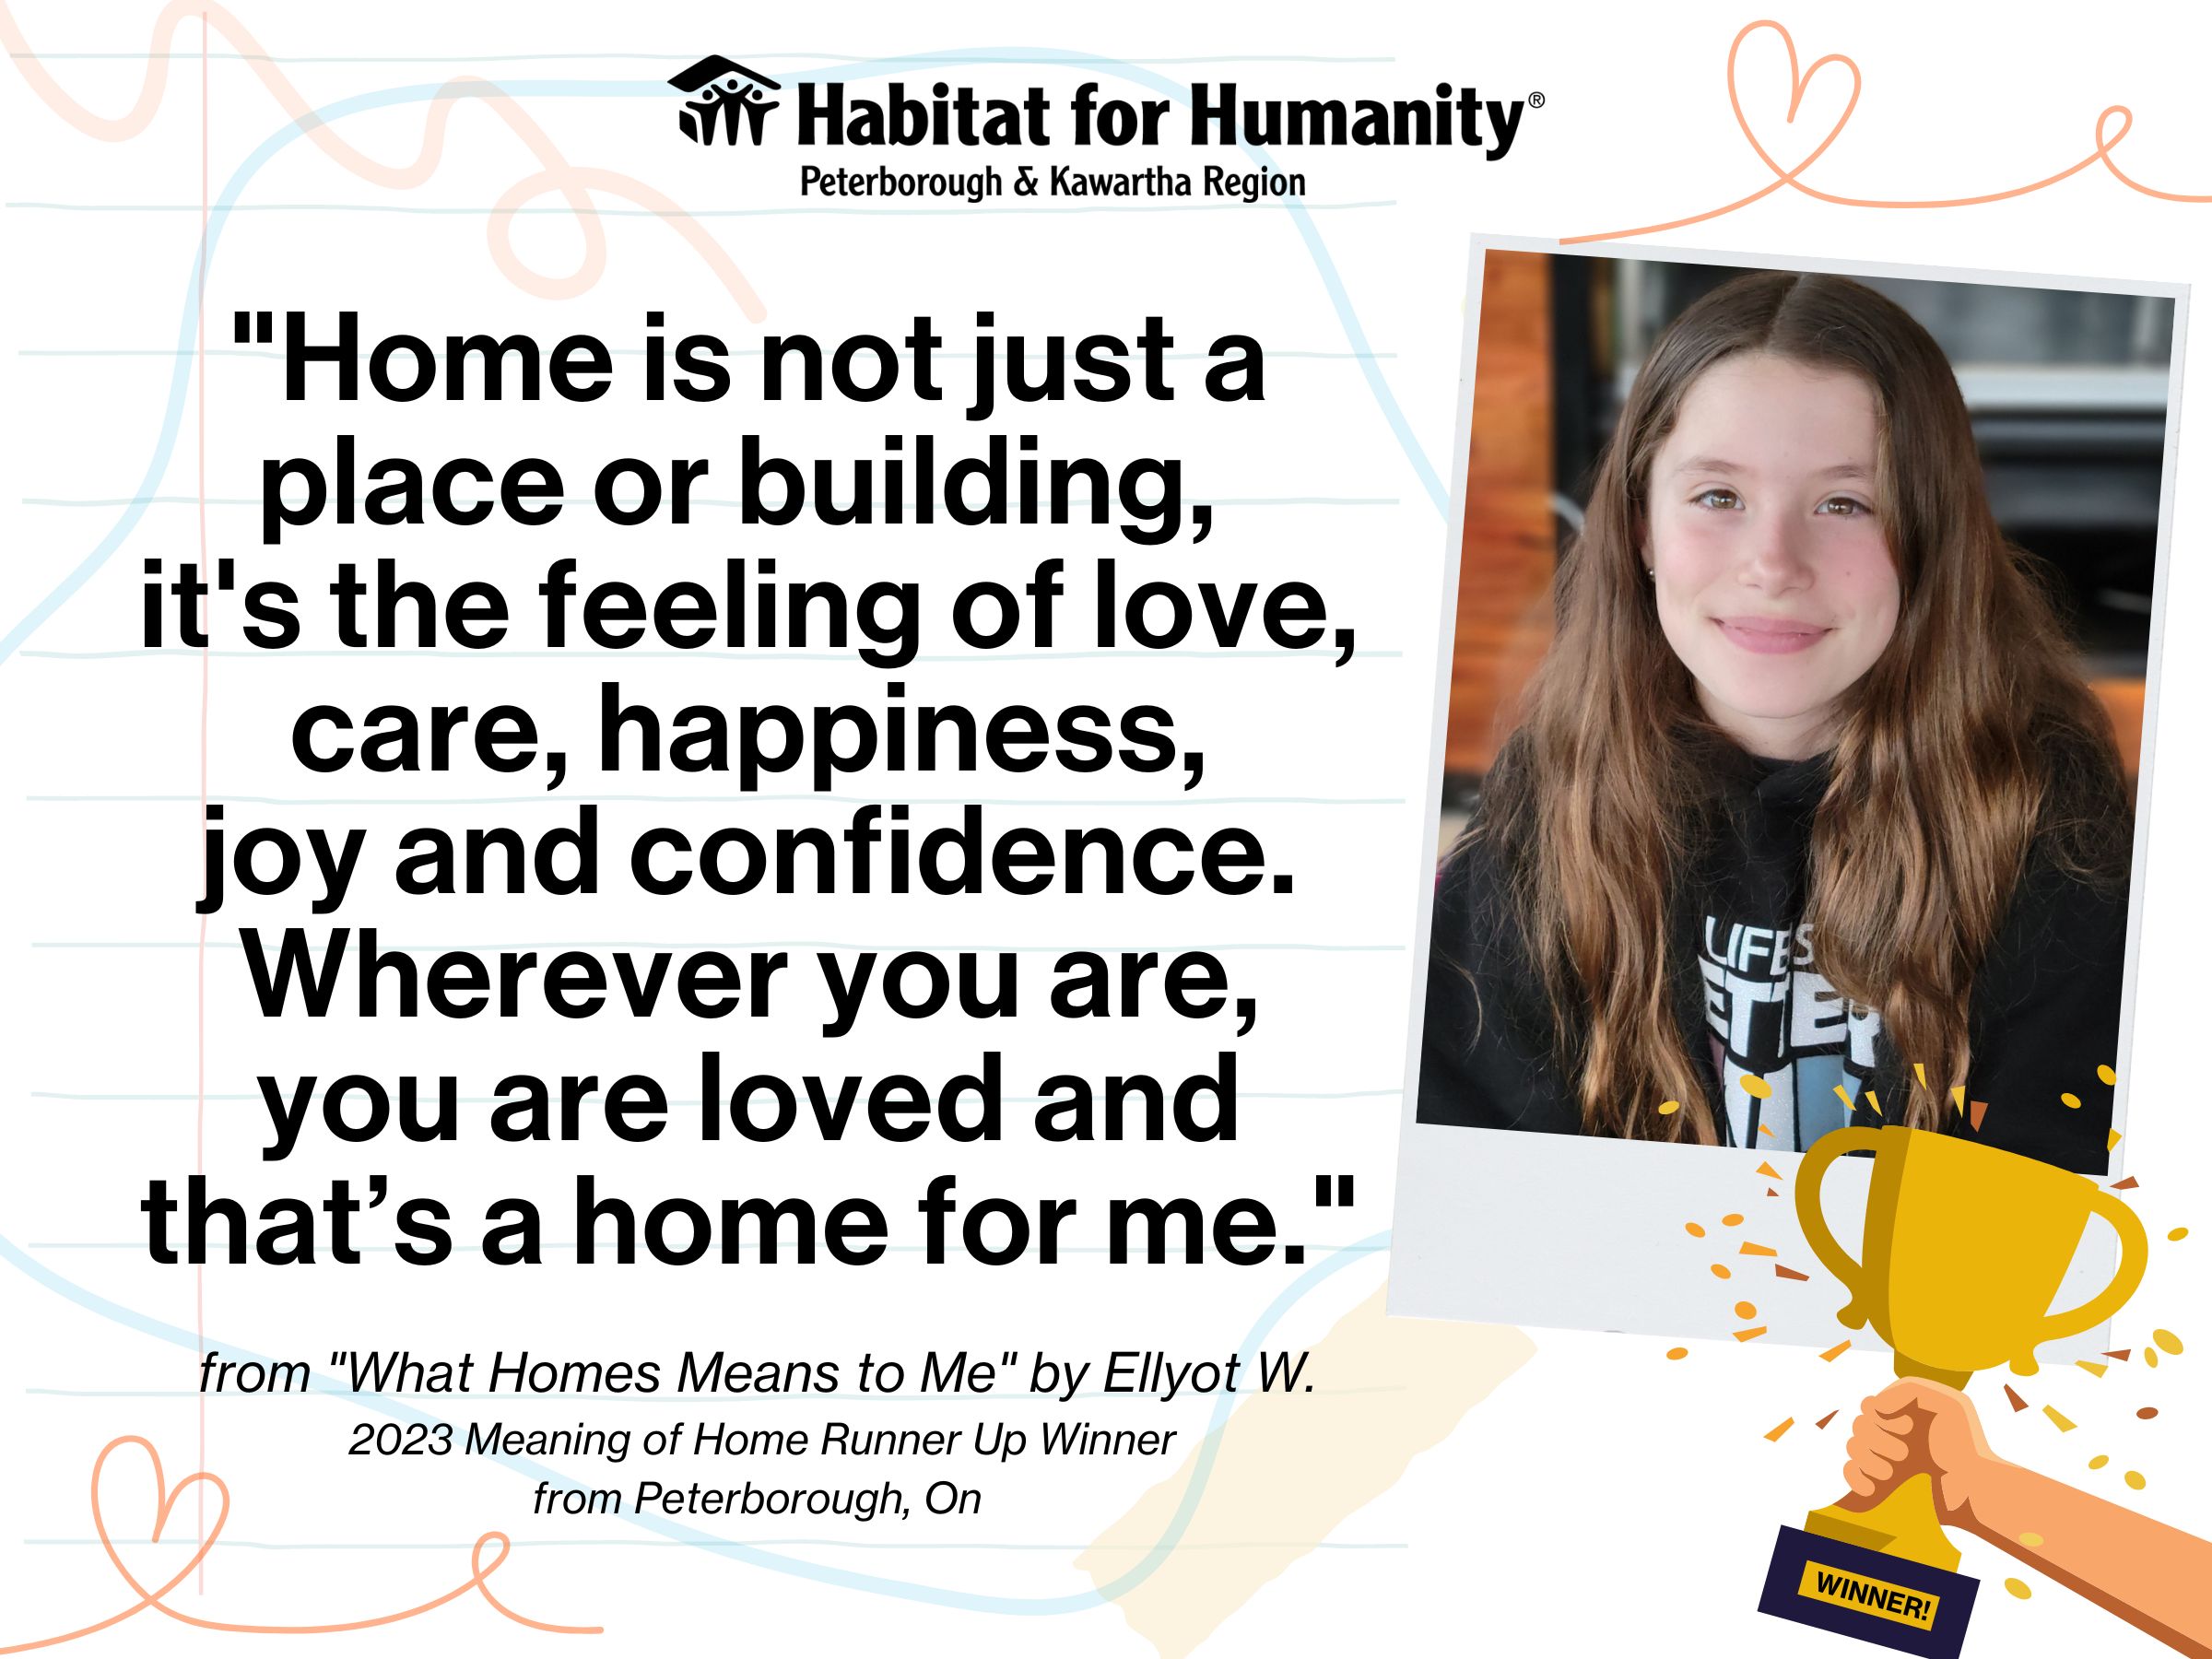 Habitat PKR logo on the top, with the text "Home is not just a place or building. It's the feeling of love, care, happiness, joy and confidence. Wherever you are, you are loved and that's a home for me." written by Ellyot W. Meaning of Home writing contest runner up from Peterborough Ontario, Photo of Ellyot on the right hand side of the image, with a graphic of a trophy with the text "winner!"